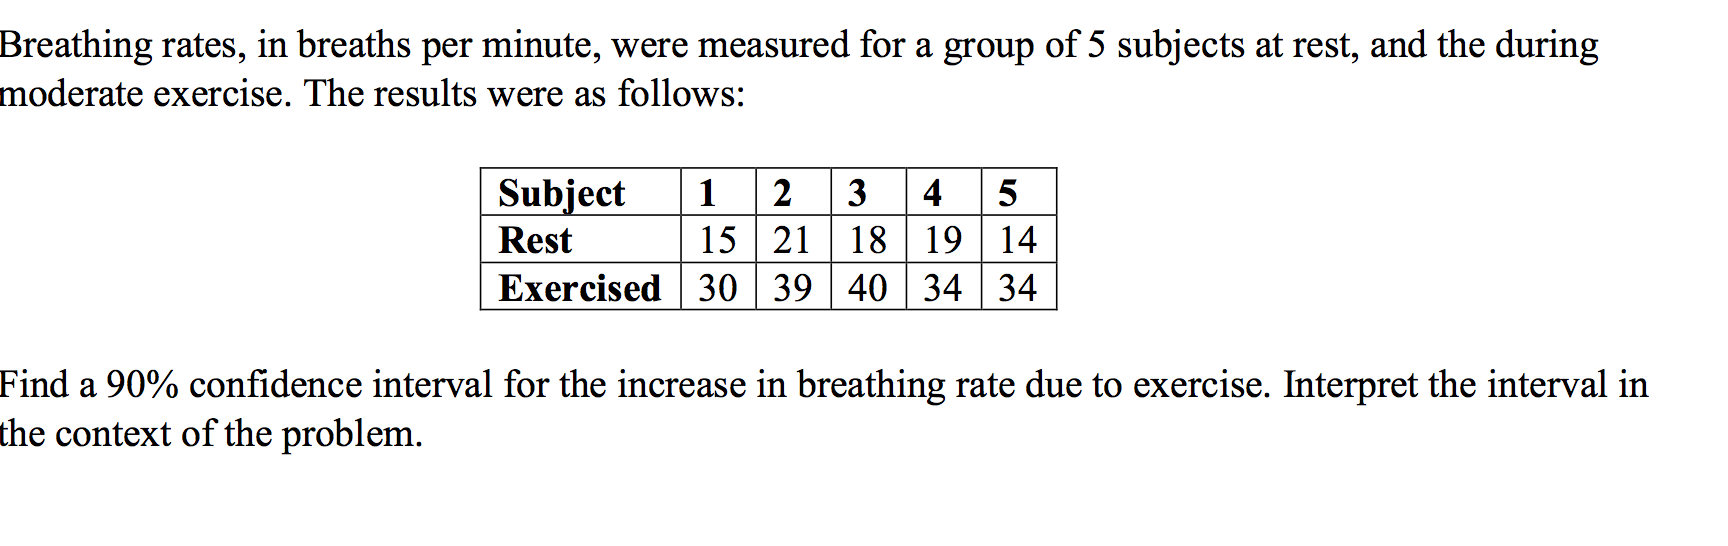 Breathing rates, in breaths per minute, were measured for a group of 5 subjects at rest, and the during
moderate exercise. The results were as follows:
3 4 5
21 | 18 | 19 | 14
Exercised 30 39 40 | 34 34
Subject
1
2
Rest
15
Find a 90% confidence interval for the increase in breathing rate due to exercise. Interpret the interval in
the context of the problem.
